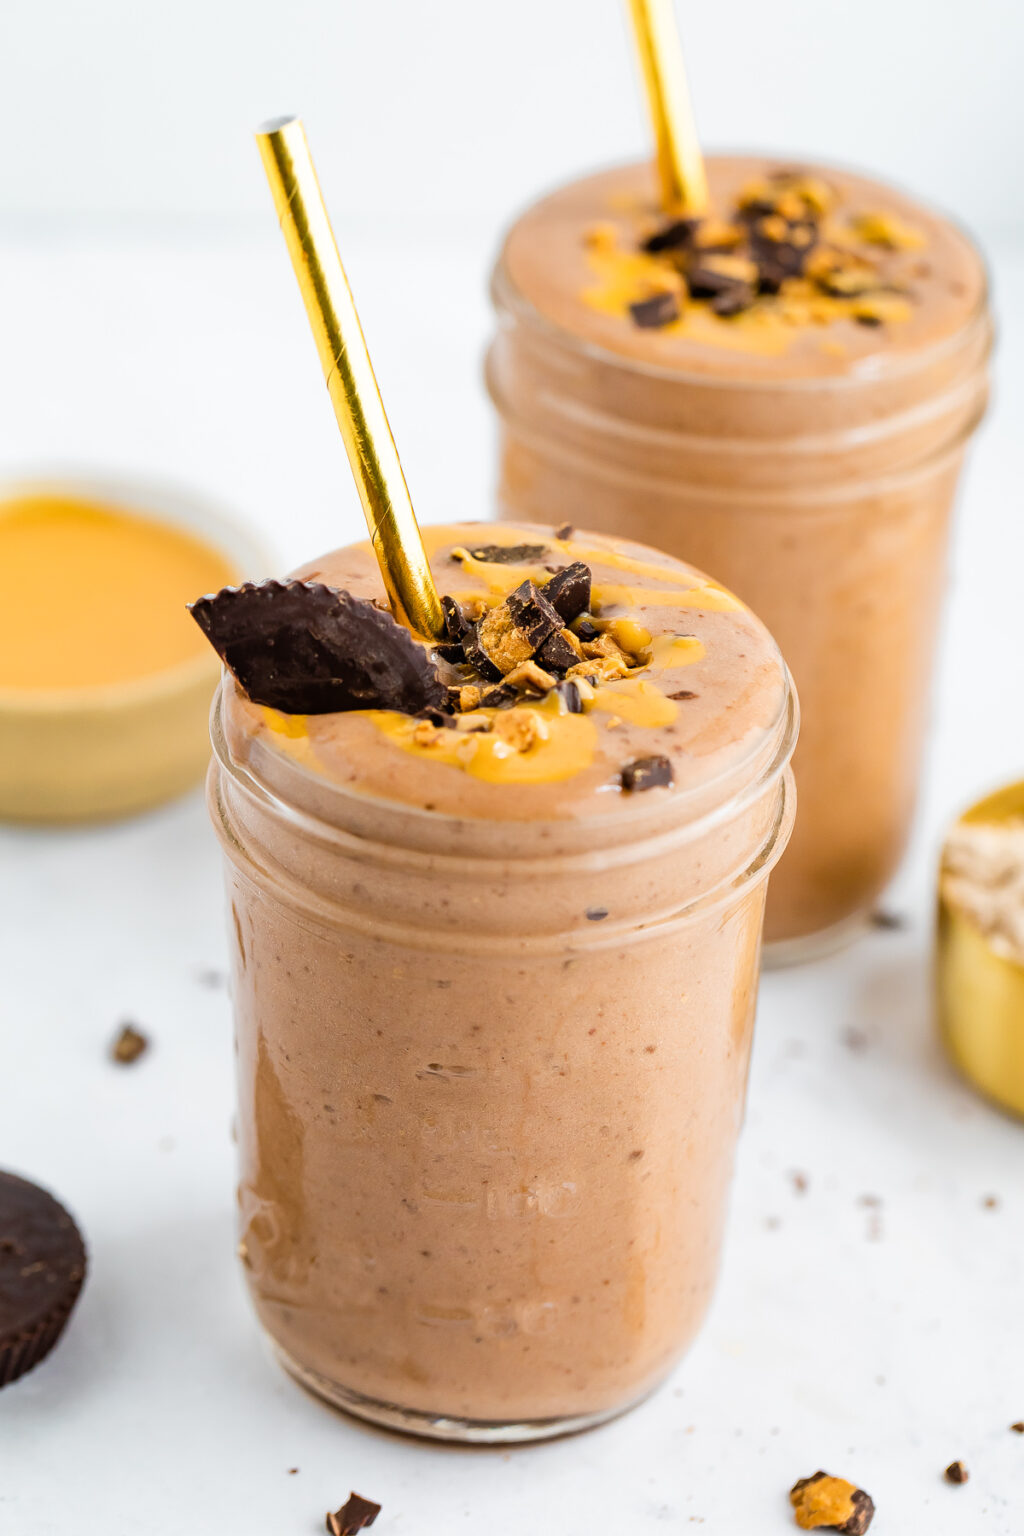 Chocolate Peanut Butter Smoothie - Eating Bird Food